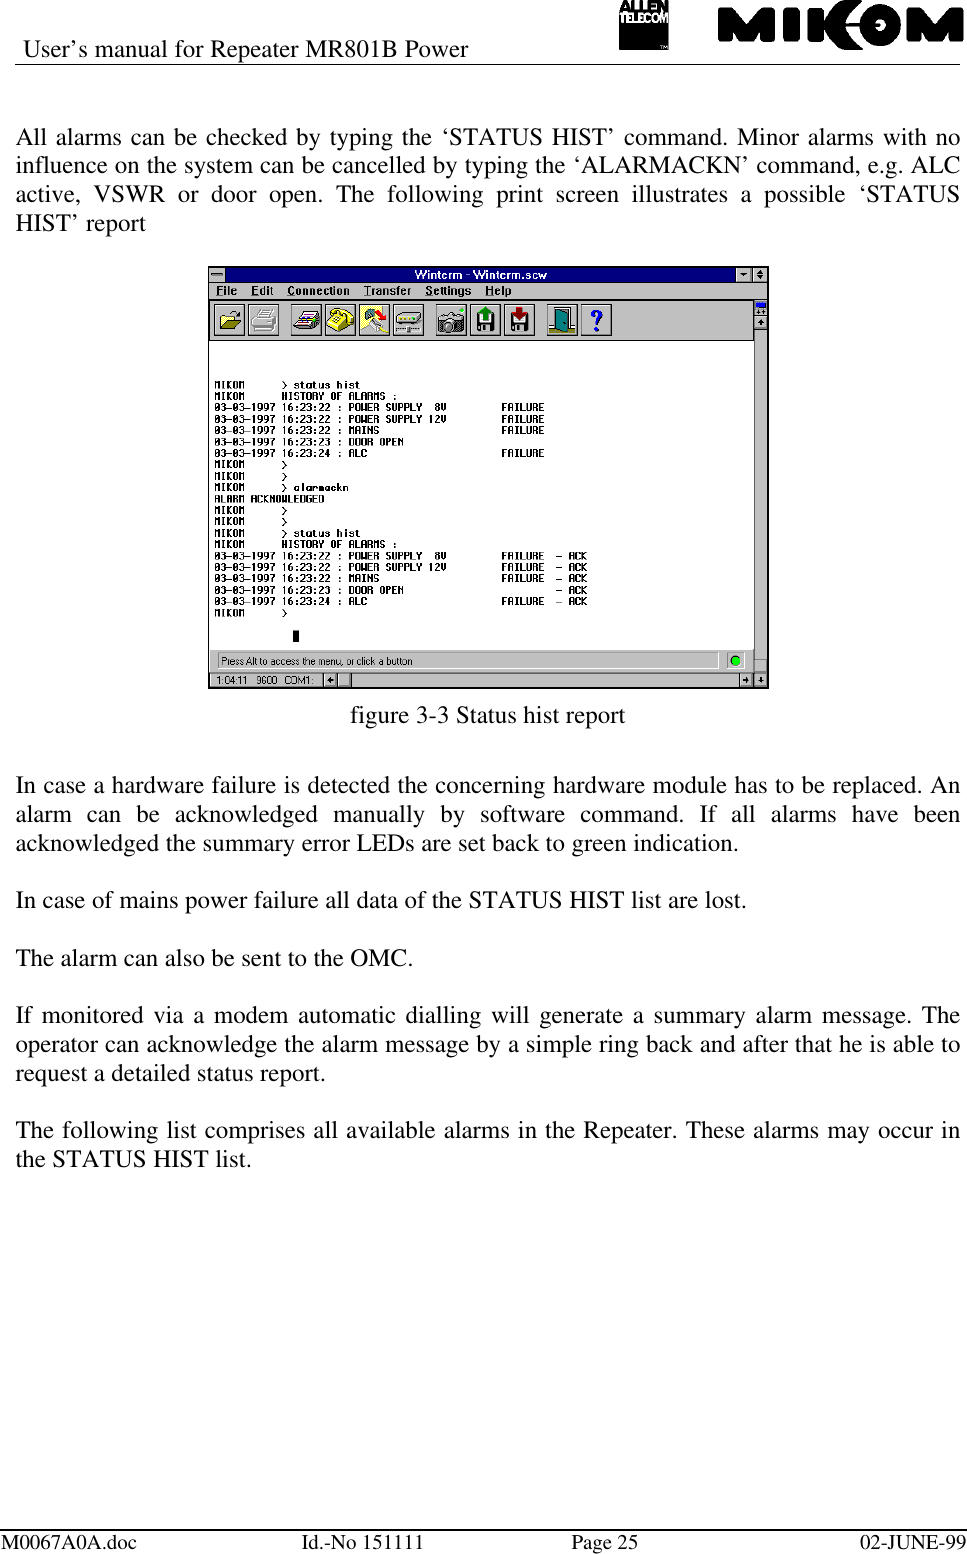 User’s manual for Repeater MR801B PowerM0067A0A.doc Id.-No 151111 Page 25 02-JUNE-99All alarms can be checked by typing the ‘STATUS HIST’ command. Minor alarms with noinfluence on the system can be cancelled by typing the ‘ALARMACKN’ command, e.g. ALCactive, VSWR or door open. The following print screen illustrates a possible ‘STATUSHIST’ reportfigure 3-3 Status hist reportIn case a hardware failure is detected the concerning hardware module has to be replaced. Analarm can be acknowledged manually by software command. If all alarms have beenacknowledged the summary error LEDs are set back to green indication.In case of mains power failure all data of the STATUS HIST list are lost.The alarm can also be sent to the OMC.If monitored via a modem automatic dialling will generate a summary alarm message. Theoperator can acknowledge the alarm message by a simple ring back and after that he is able torequest a detailed status report.The following list comprises all available alarms in the Repeater. These alarms may occur inthe STATUS HIST list.